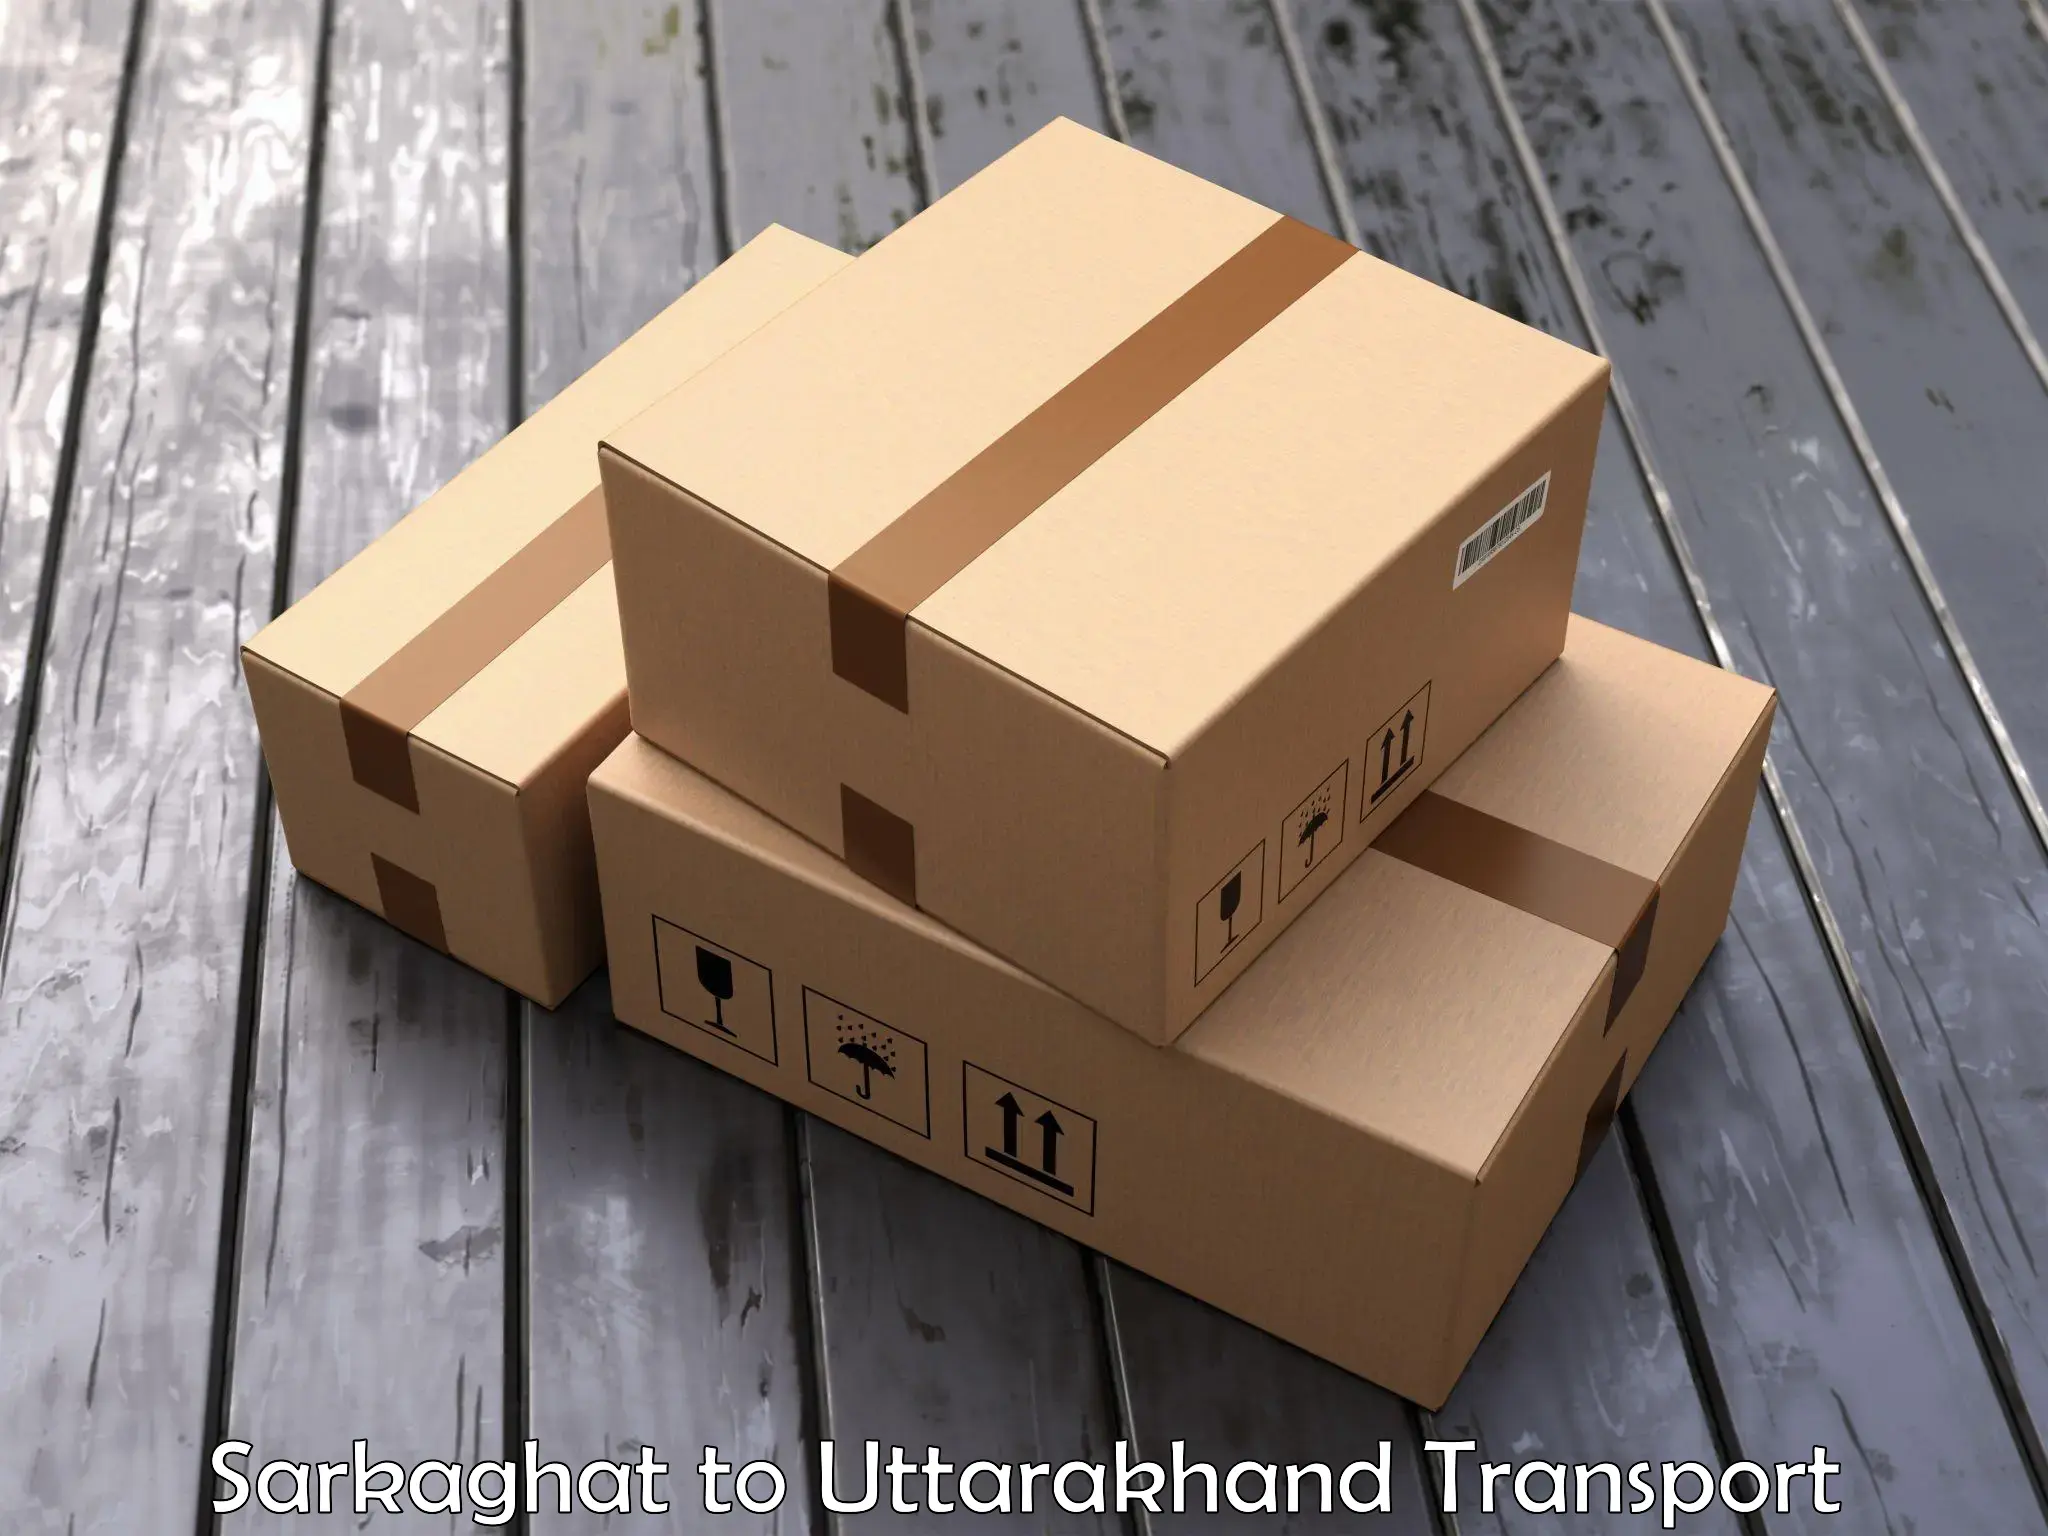 Commercial transport service Sarkaghat to IIT Roorkee